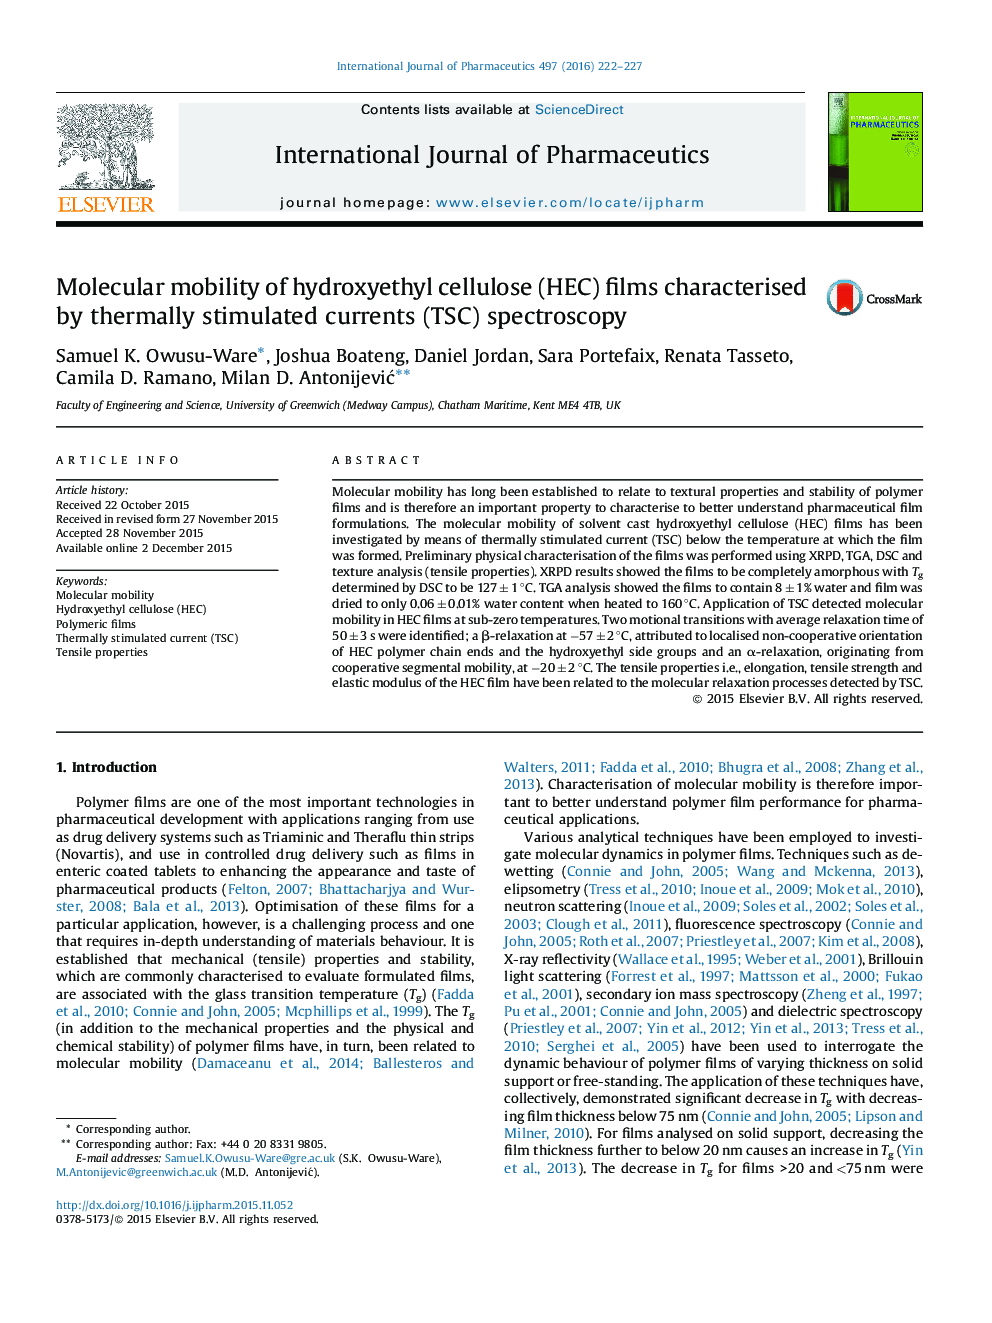 Molecular mobility of hydroxyethyl cellulose (HEC) films characterised by thermally stimulated currents (TSC) spectroscopy